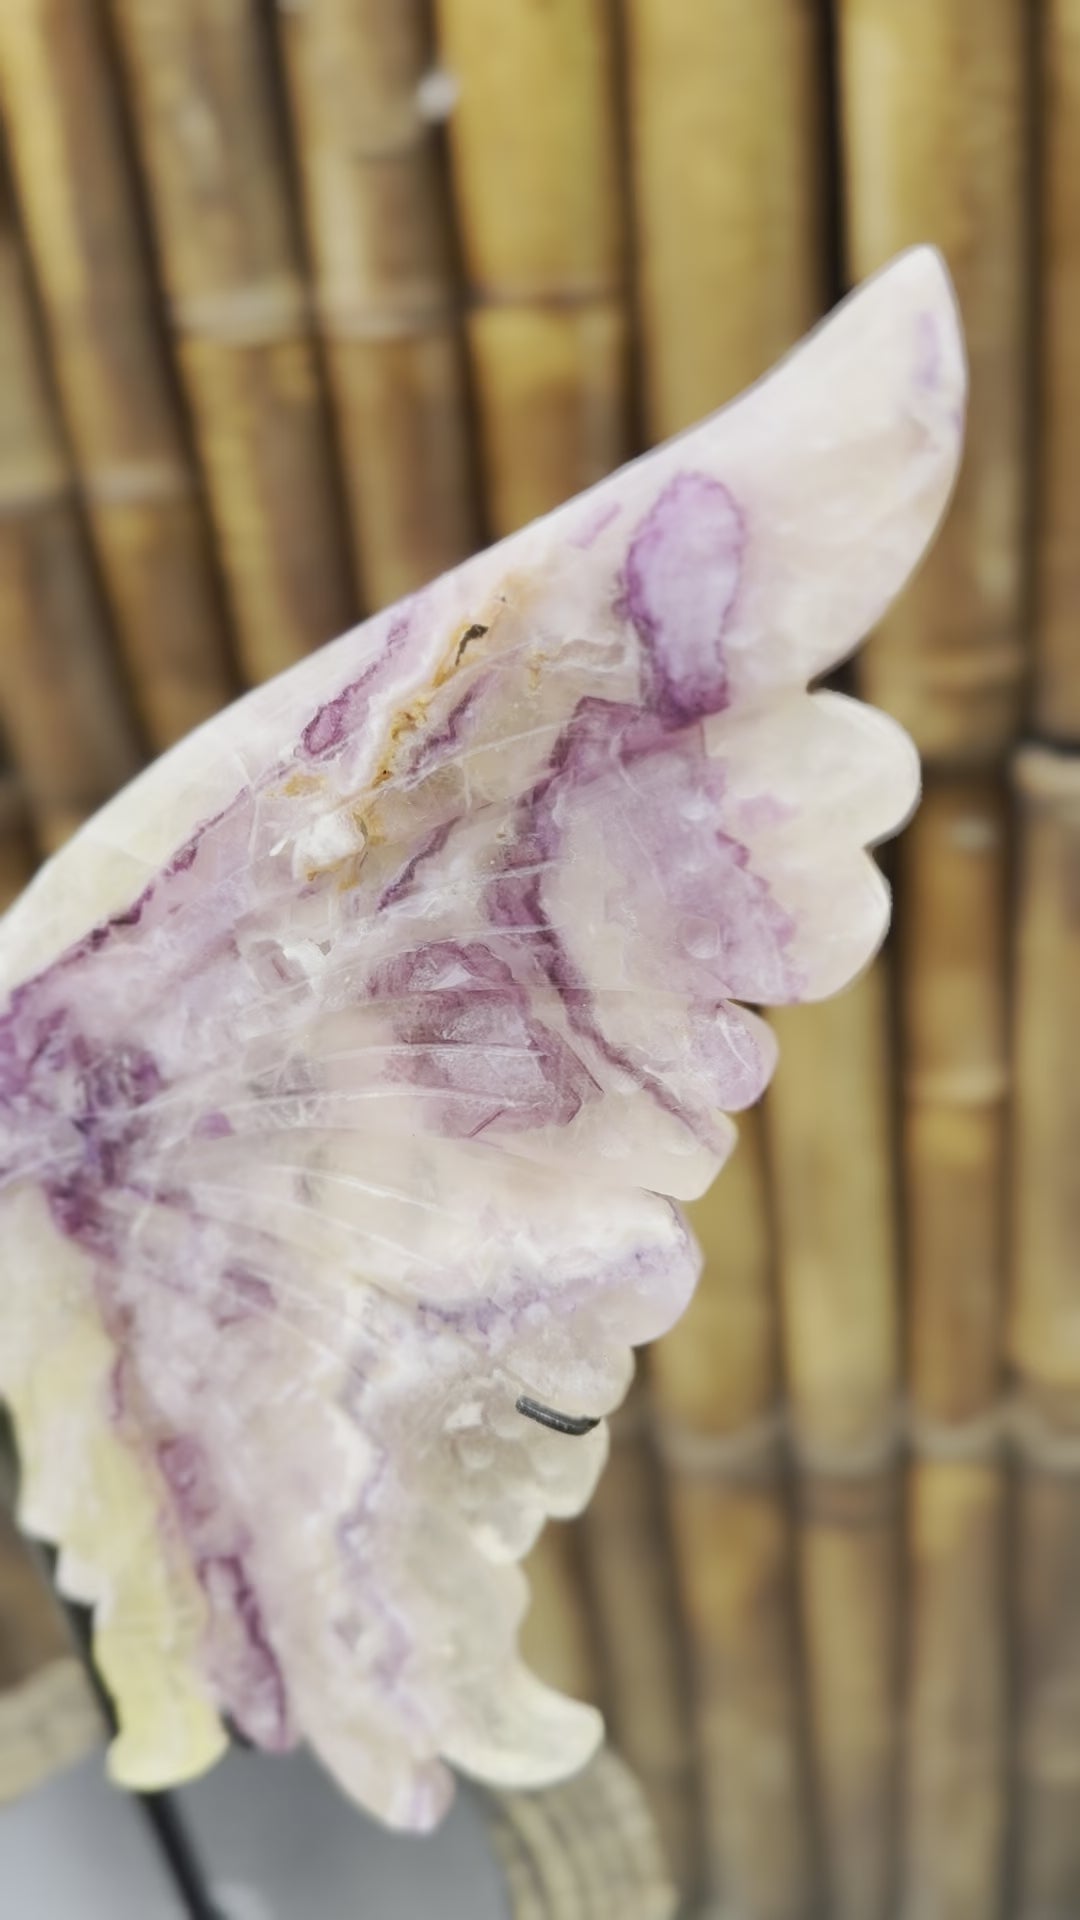 Rainbow Fluorite butterfly wings in stand for Focus, Creativity & Productivity